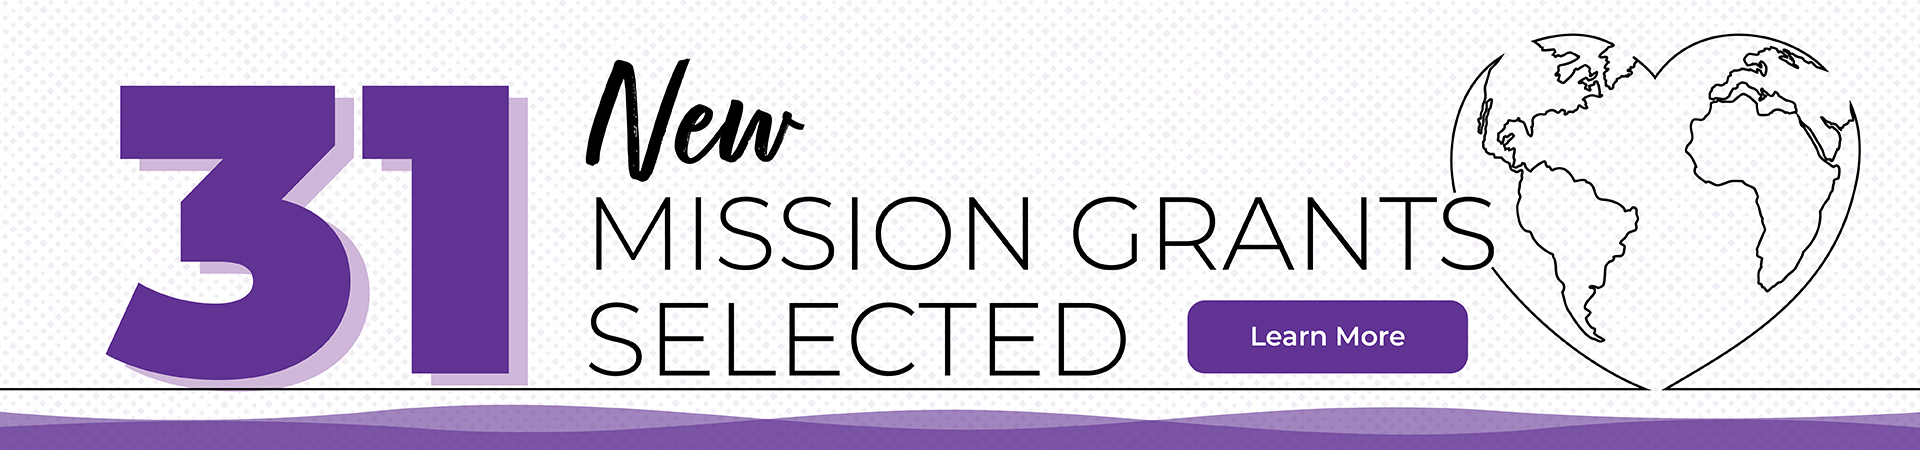 31 new mission grants selected. Learn More.